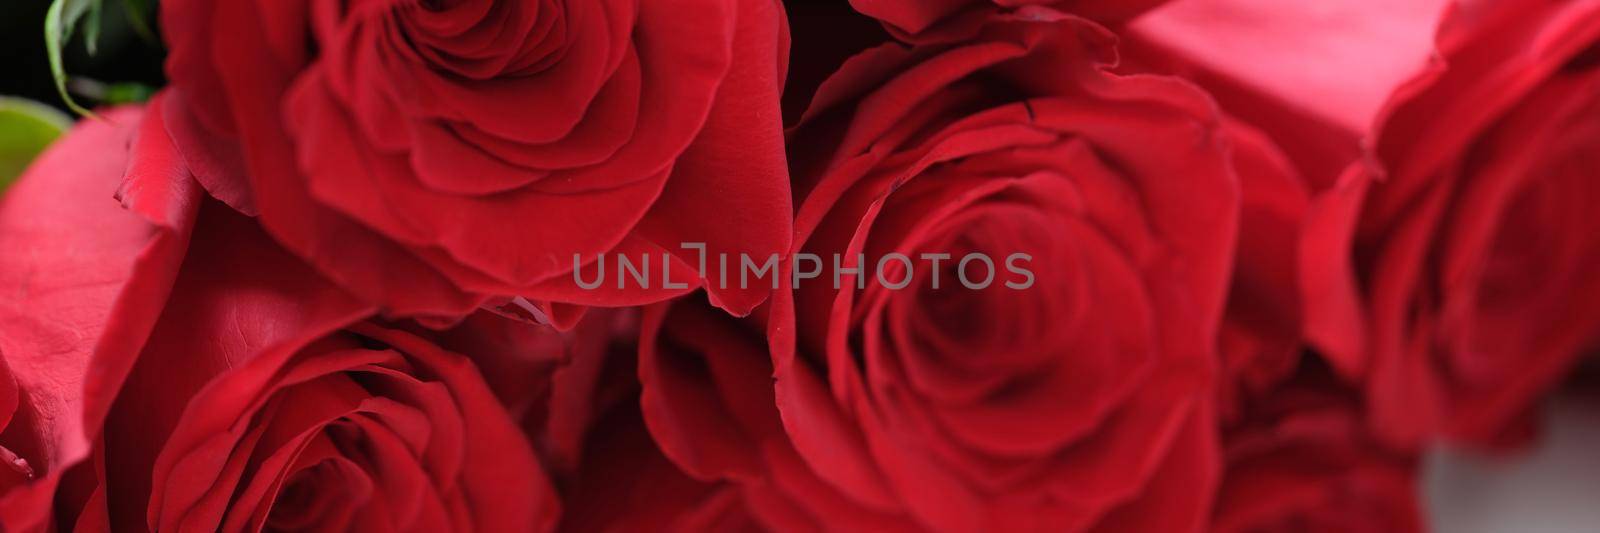 Closeup of large bouquet of red roses background by kuprevich